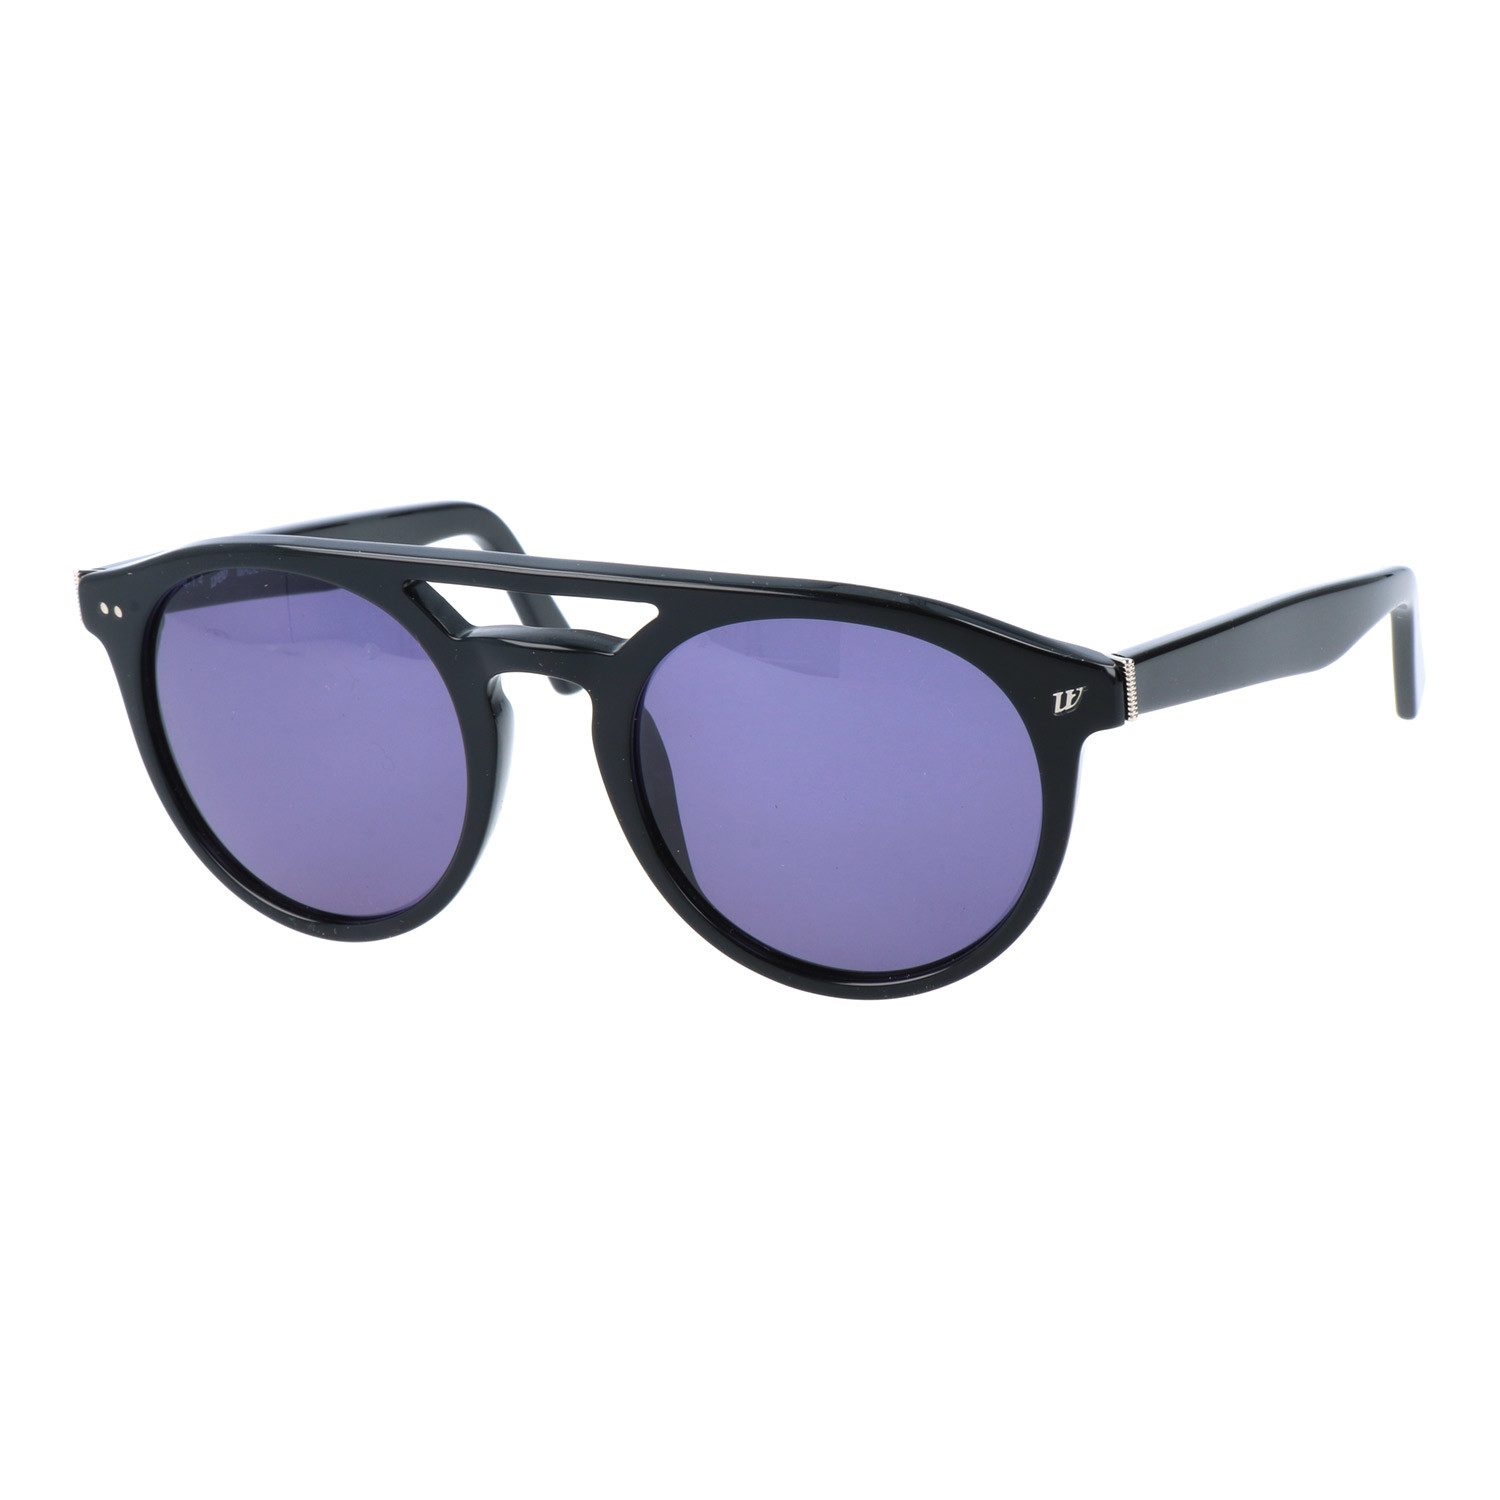 Double Bar Rounded Sunglasses // Black - Web Eyewear - Touch of Modern